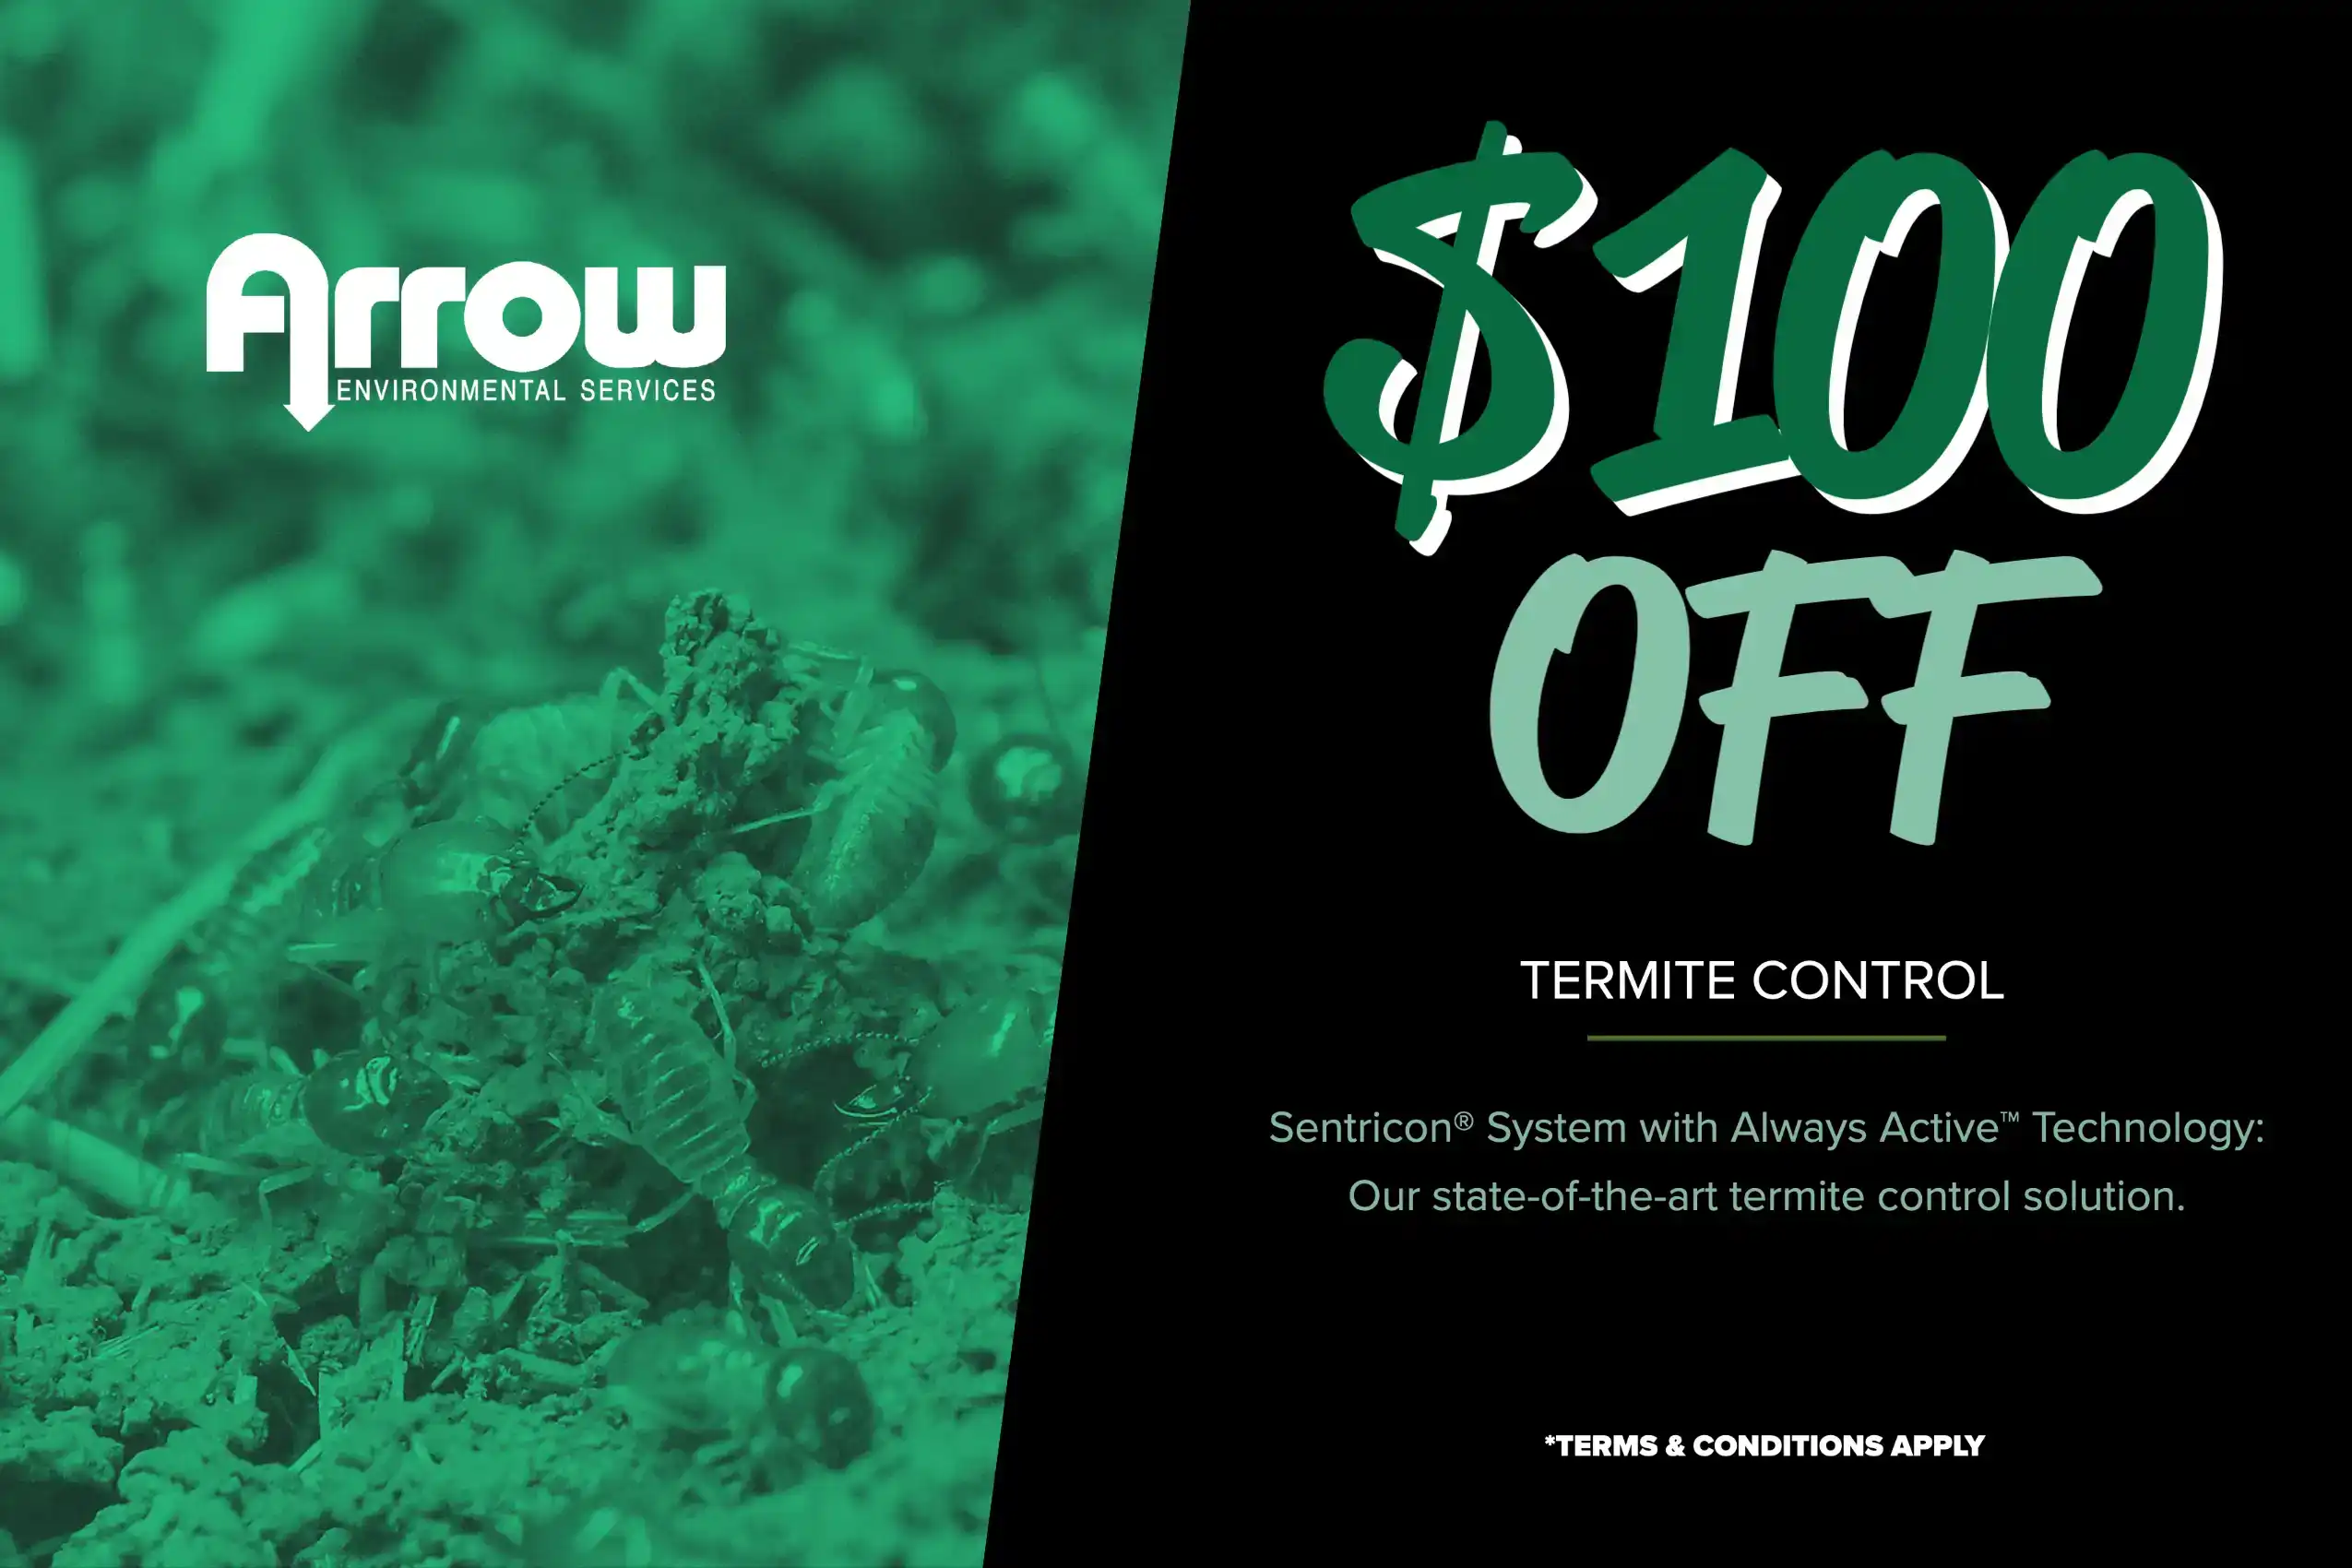 $100 off coupon for termite control